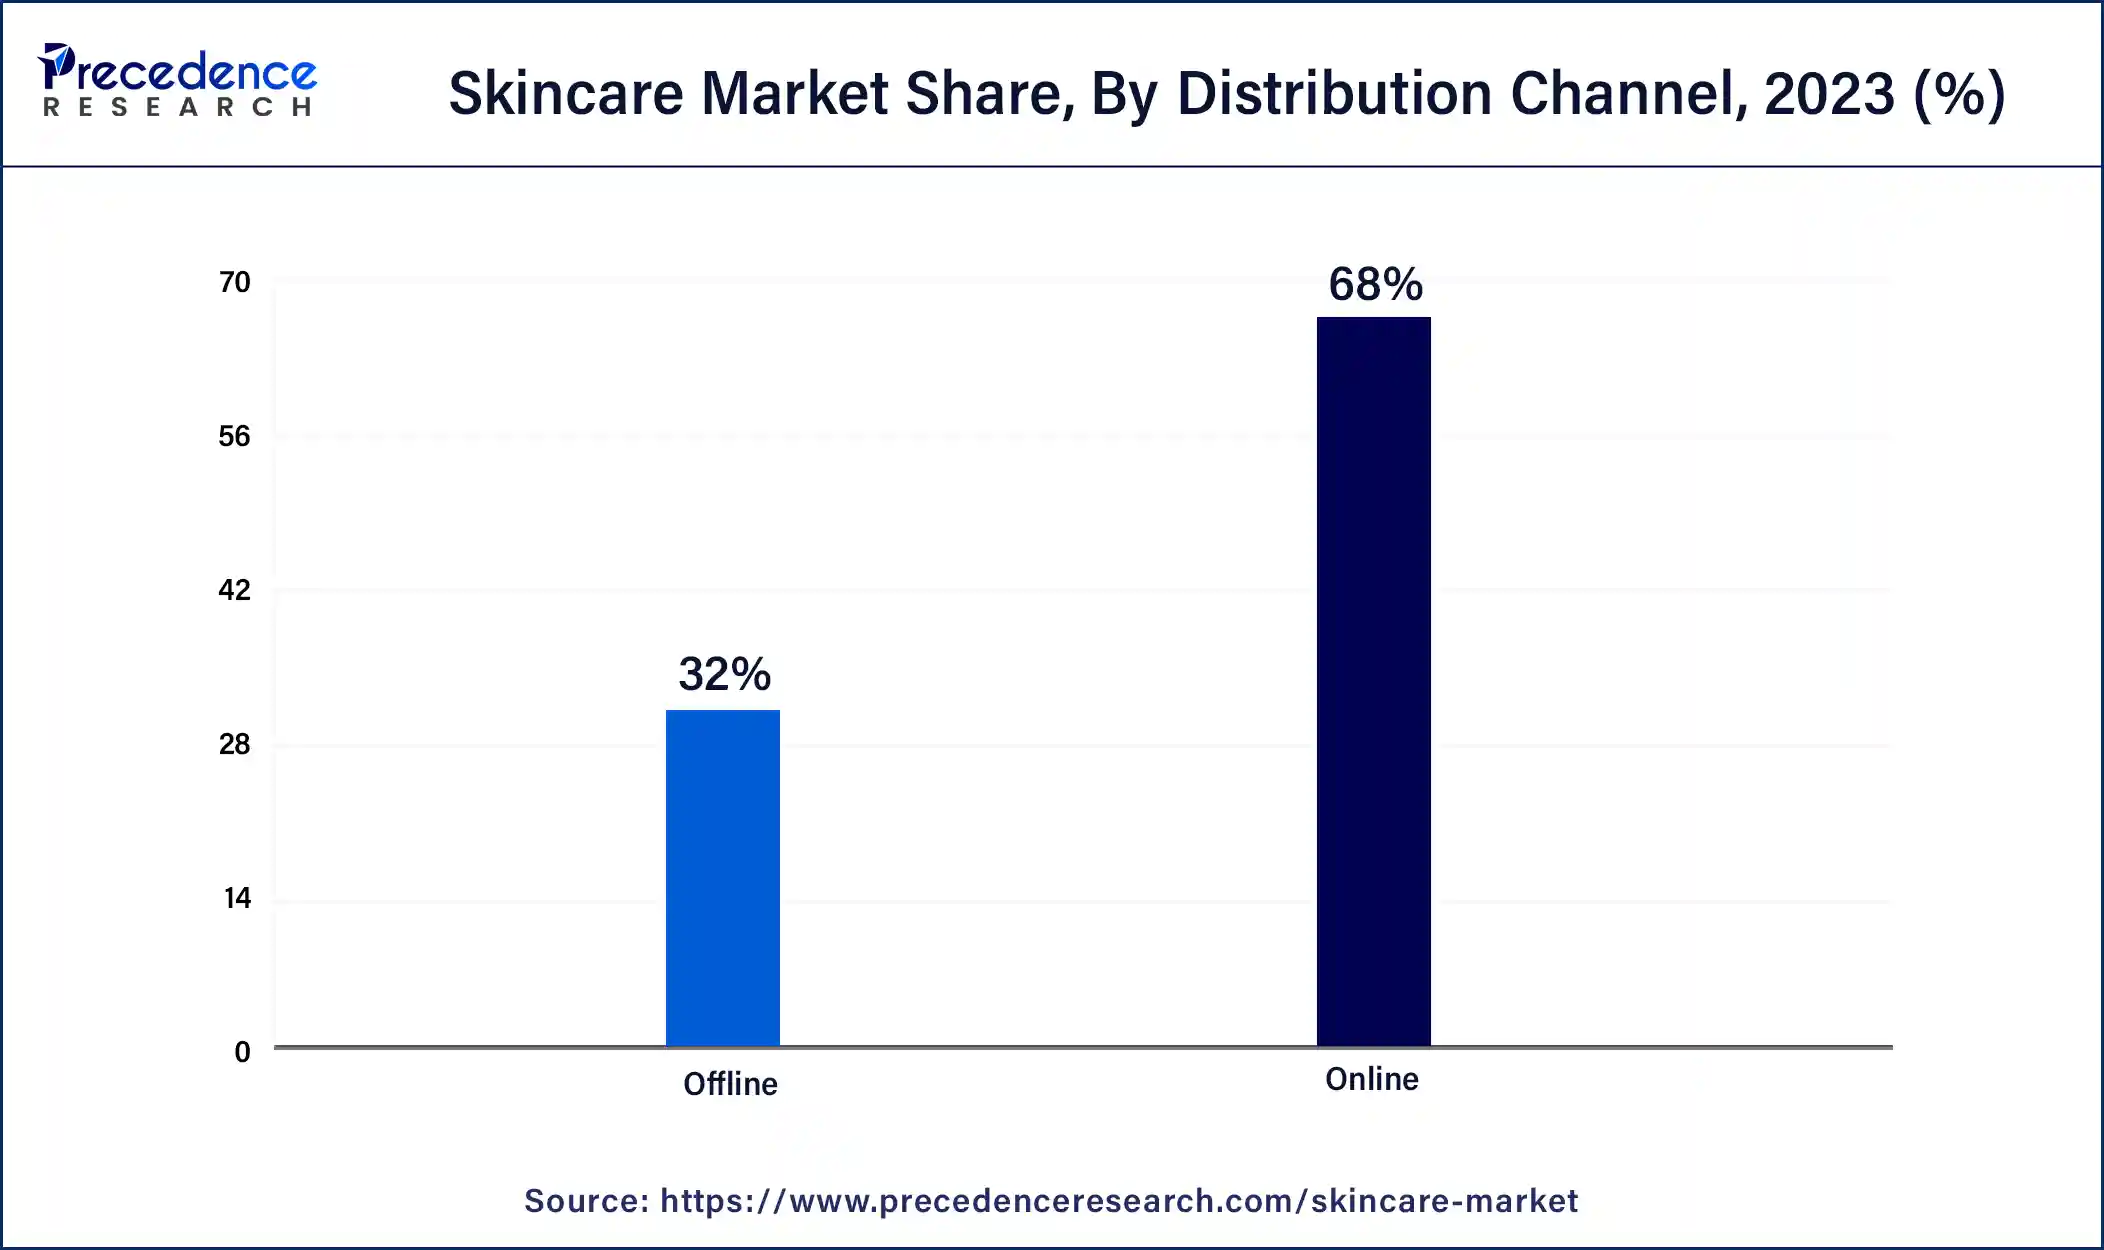 Skincare Market Share, By Distribution Channel, 2023 (%)